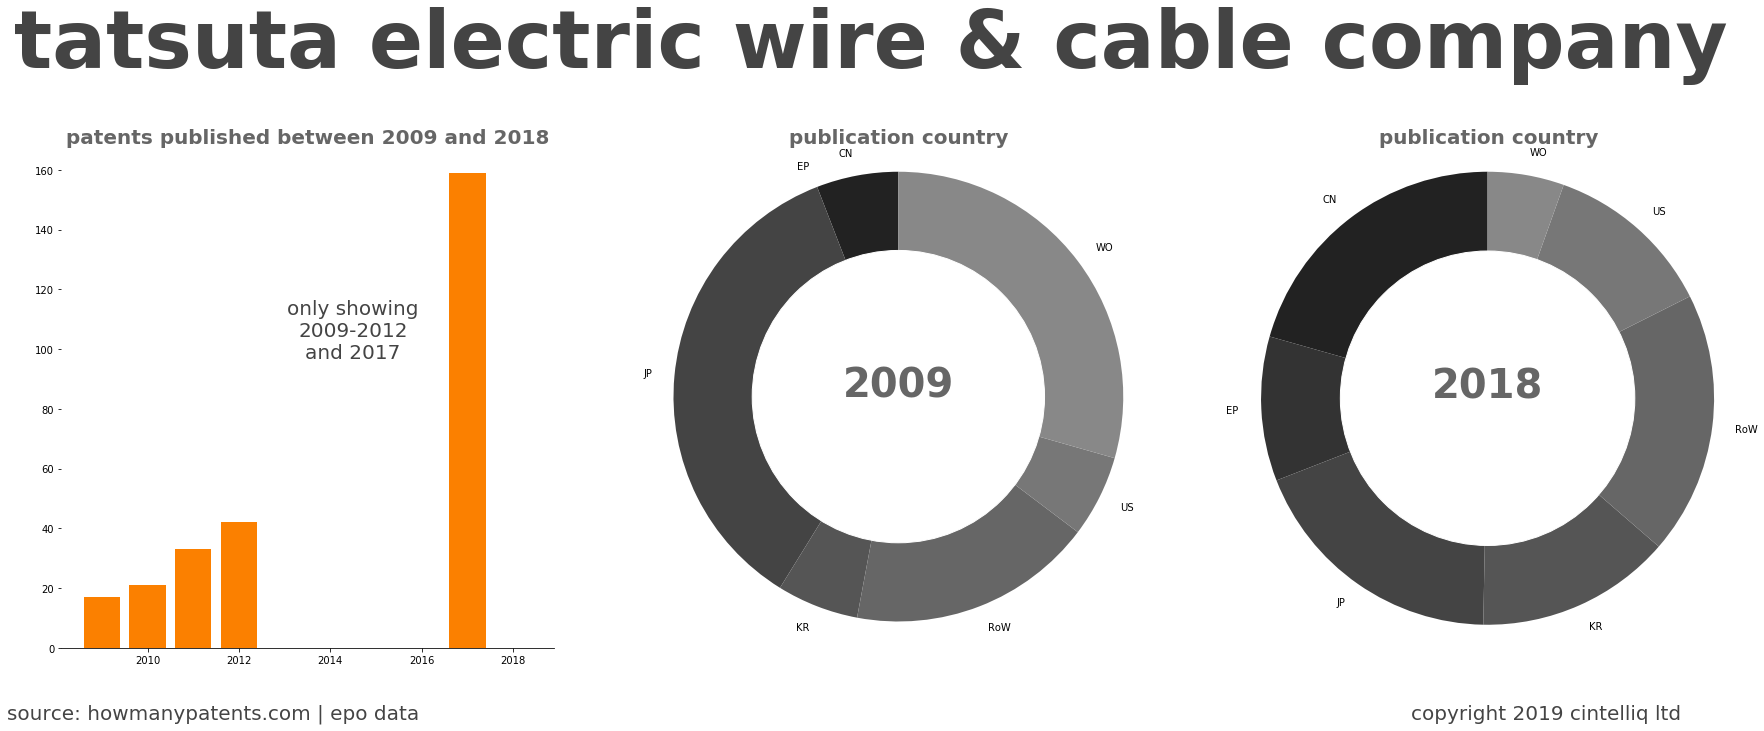 summary of patents for Tatsuta Electric Wire & Cable Company